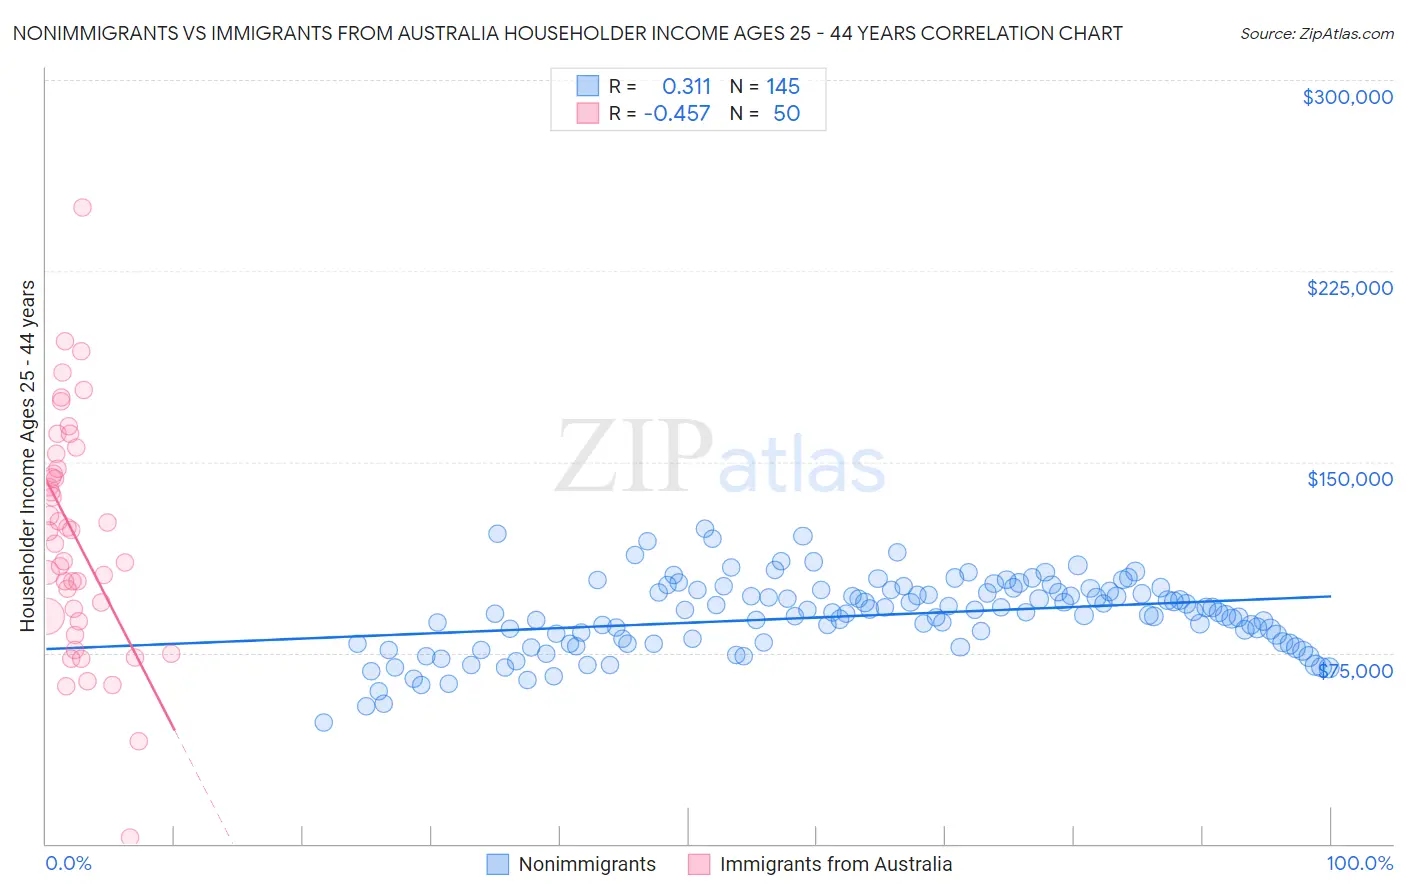 Nonimmigrants vs Immigrants from Australia Householder Income Ages 25 - 44 years